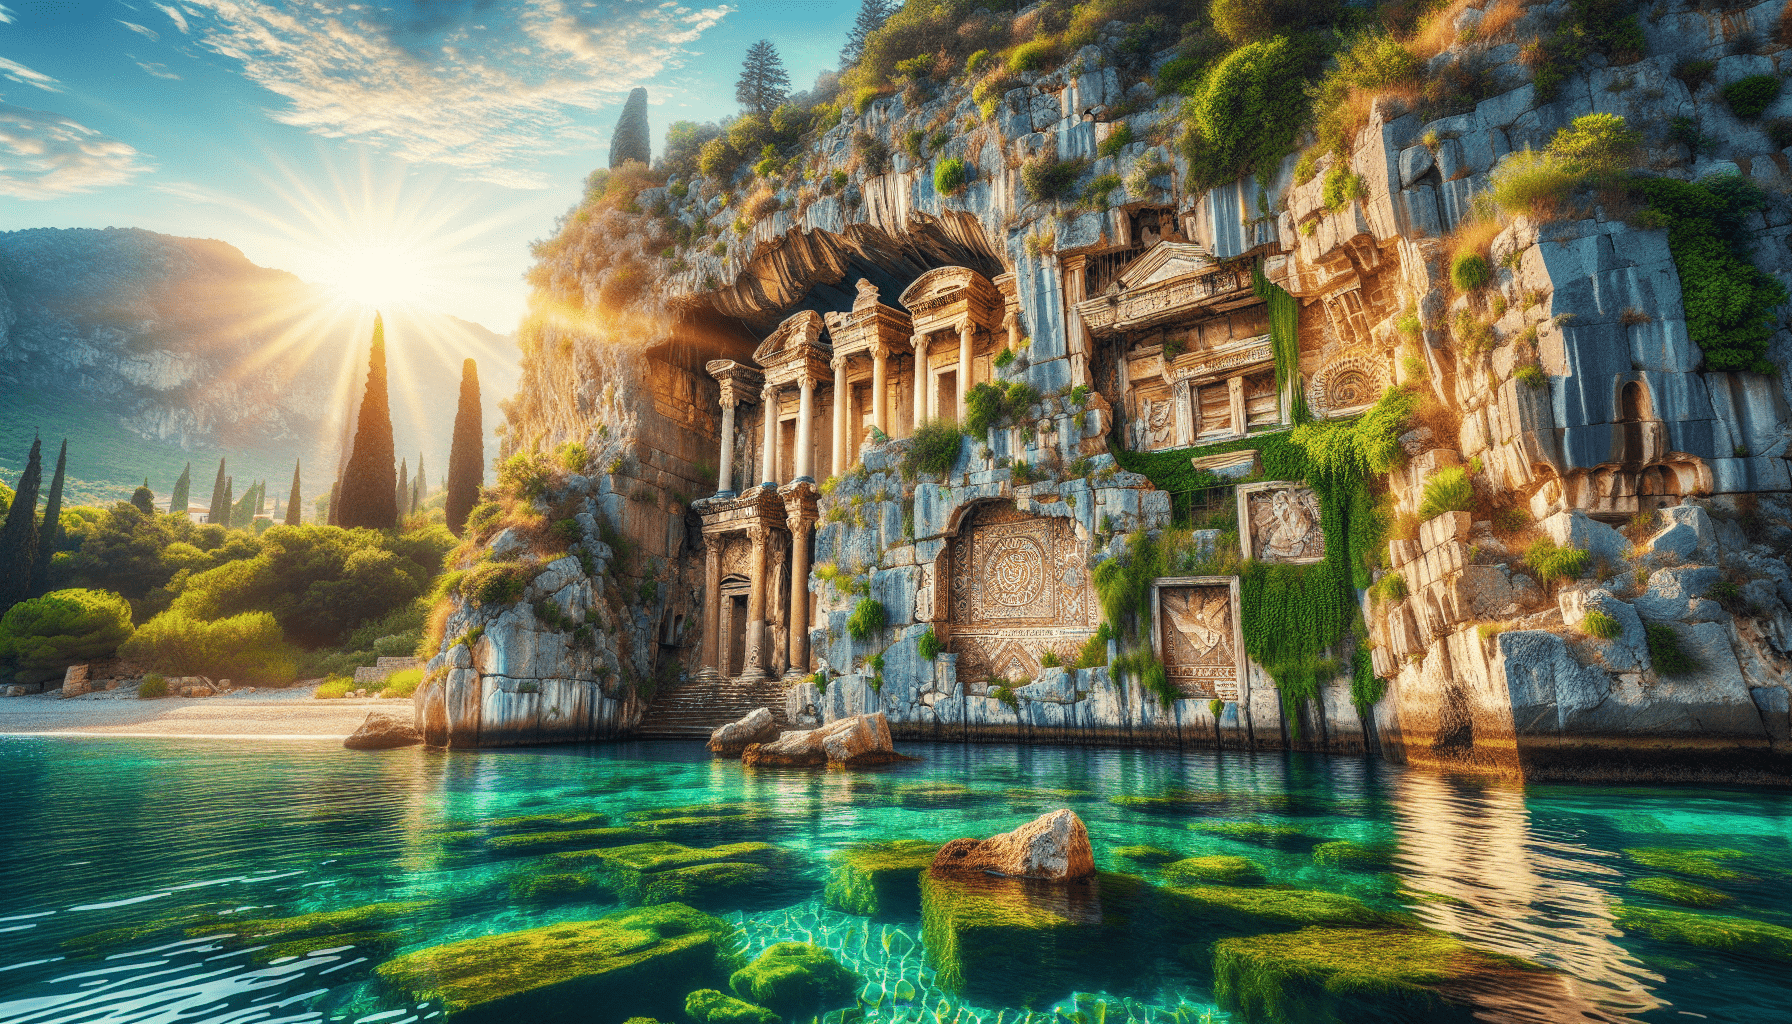 Ancient stone temple facade carved into a rocky cliff, surrounded by lush vegetation, with clear turquoise waters in the foreground and a bright sun shining through trees in the background.